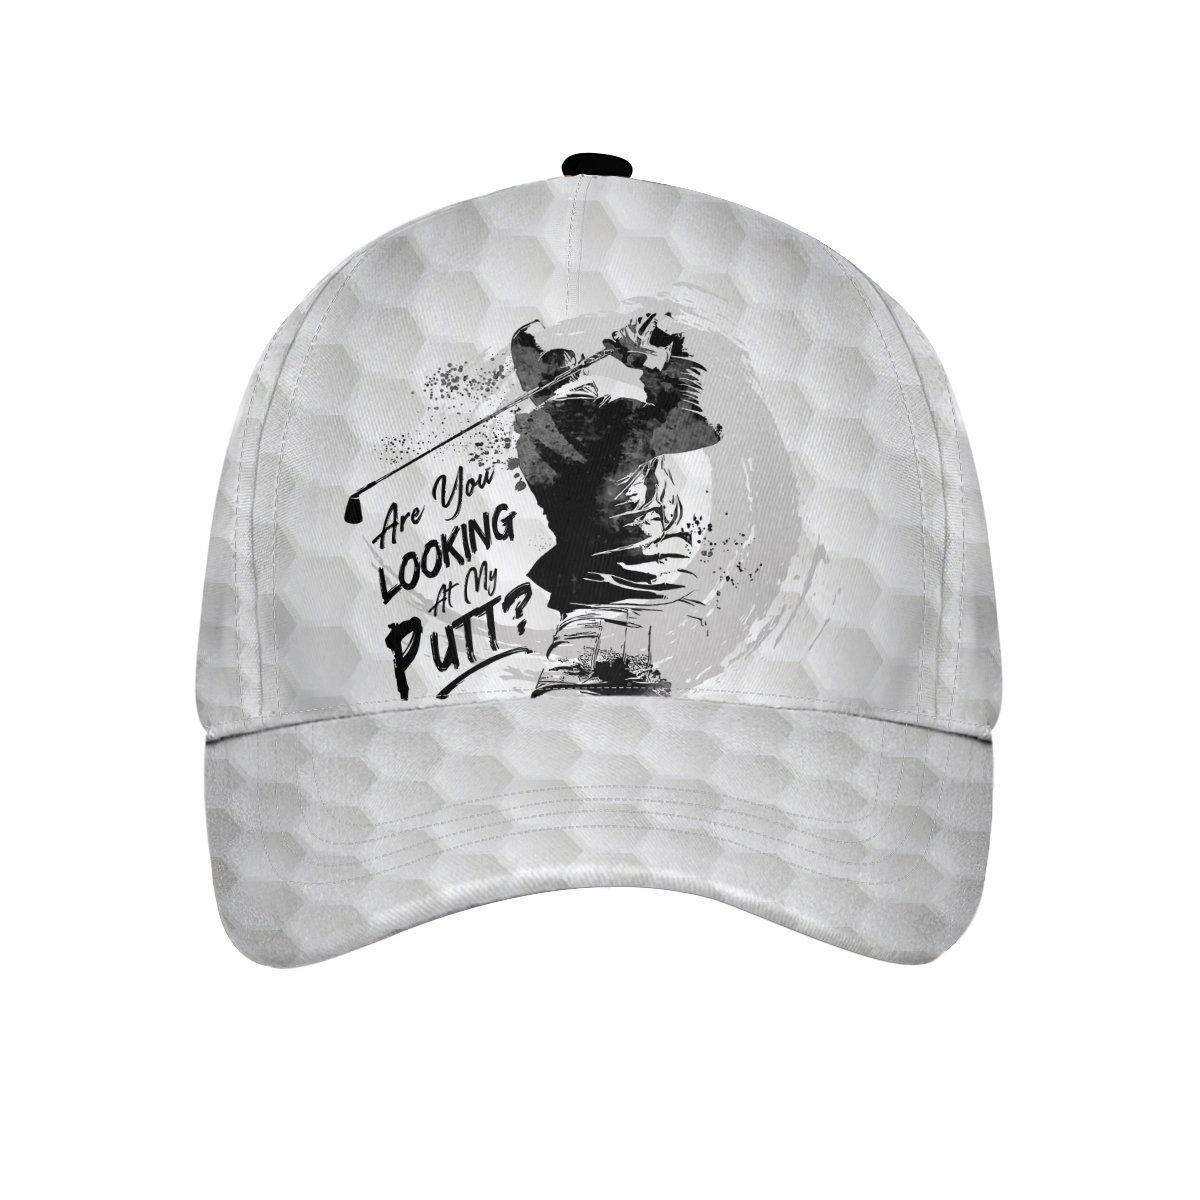 Are You Looking At My Putt Funny Golf Cap